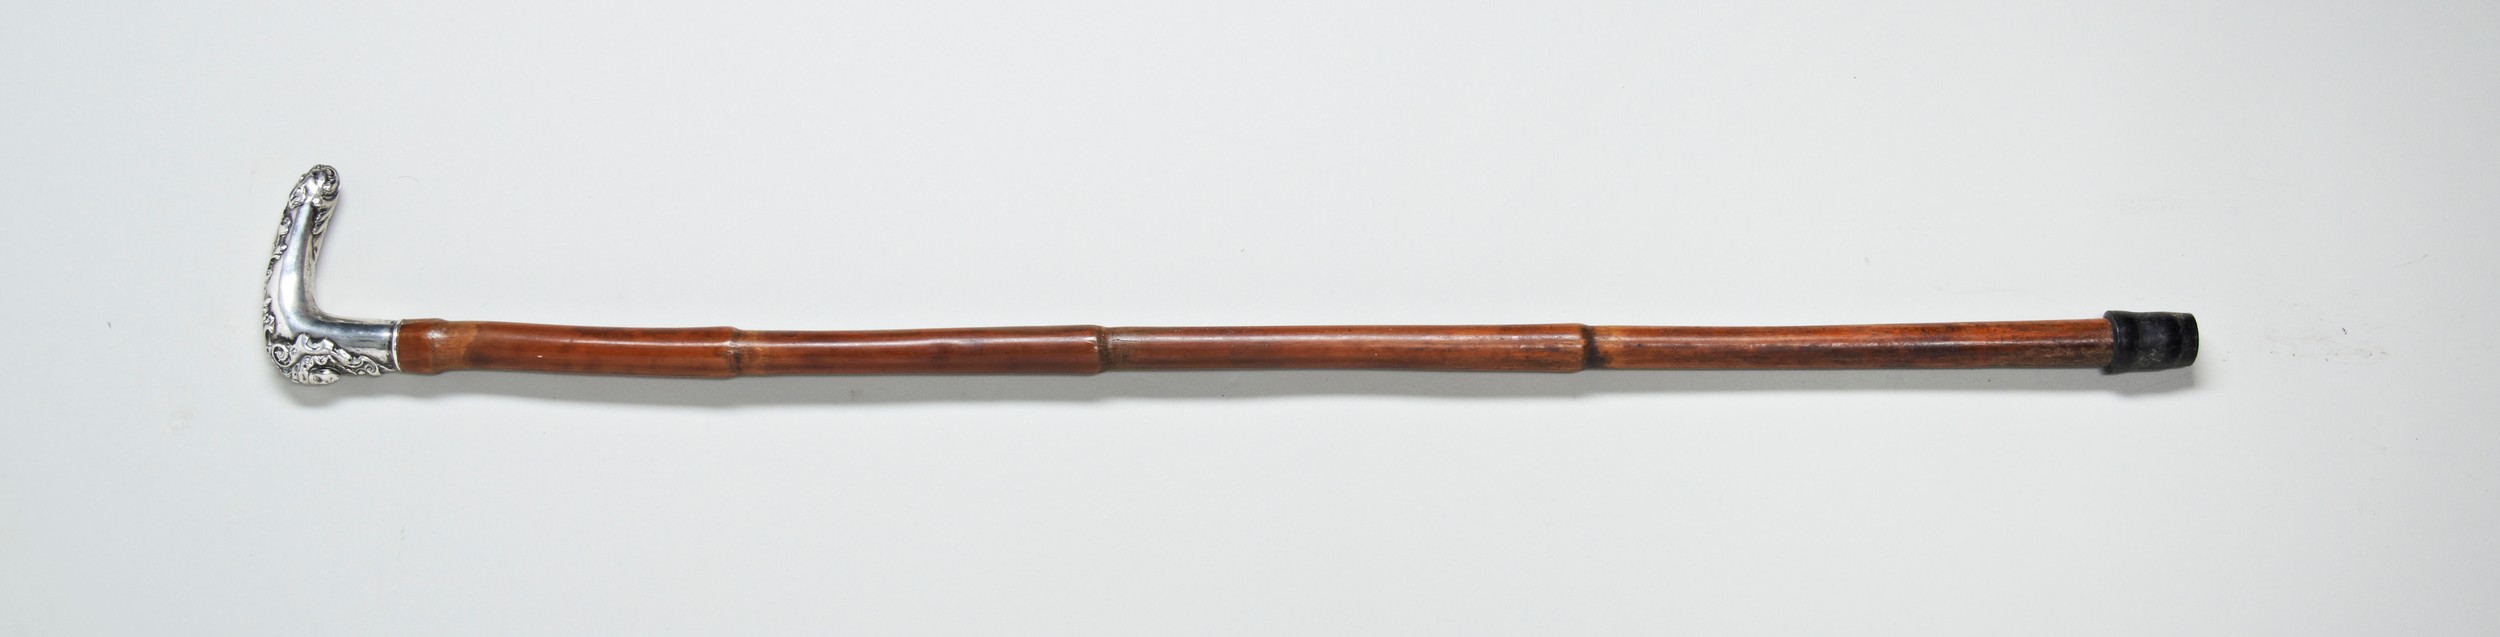 A 19TH CENTURY CANE with an ornate white metal handle decorated with a head of a grotesque and a